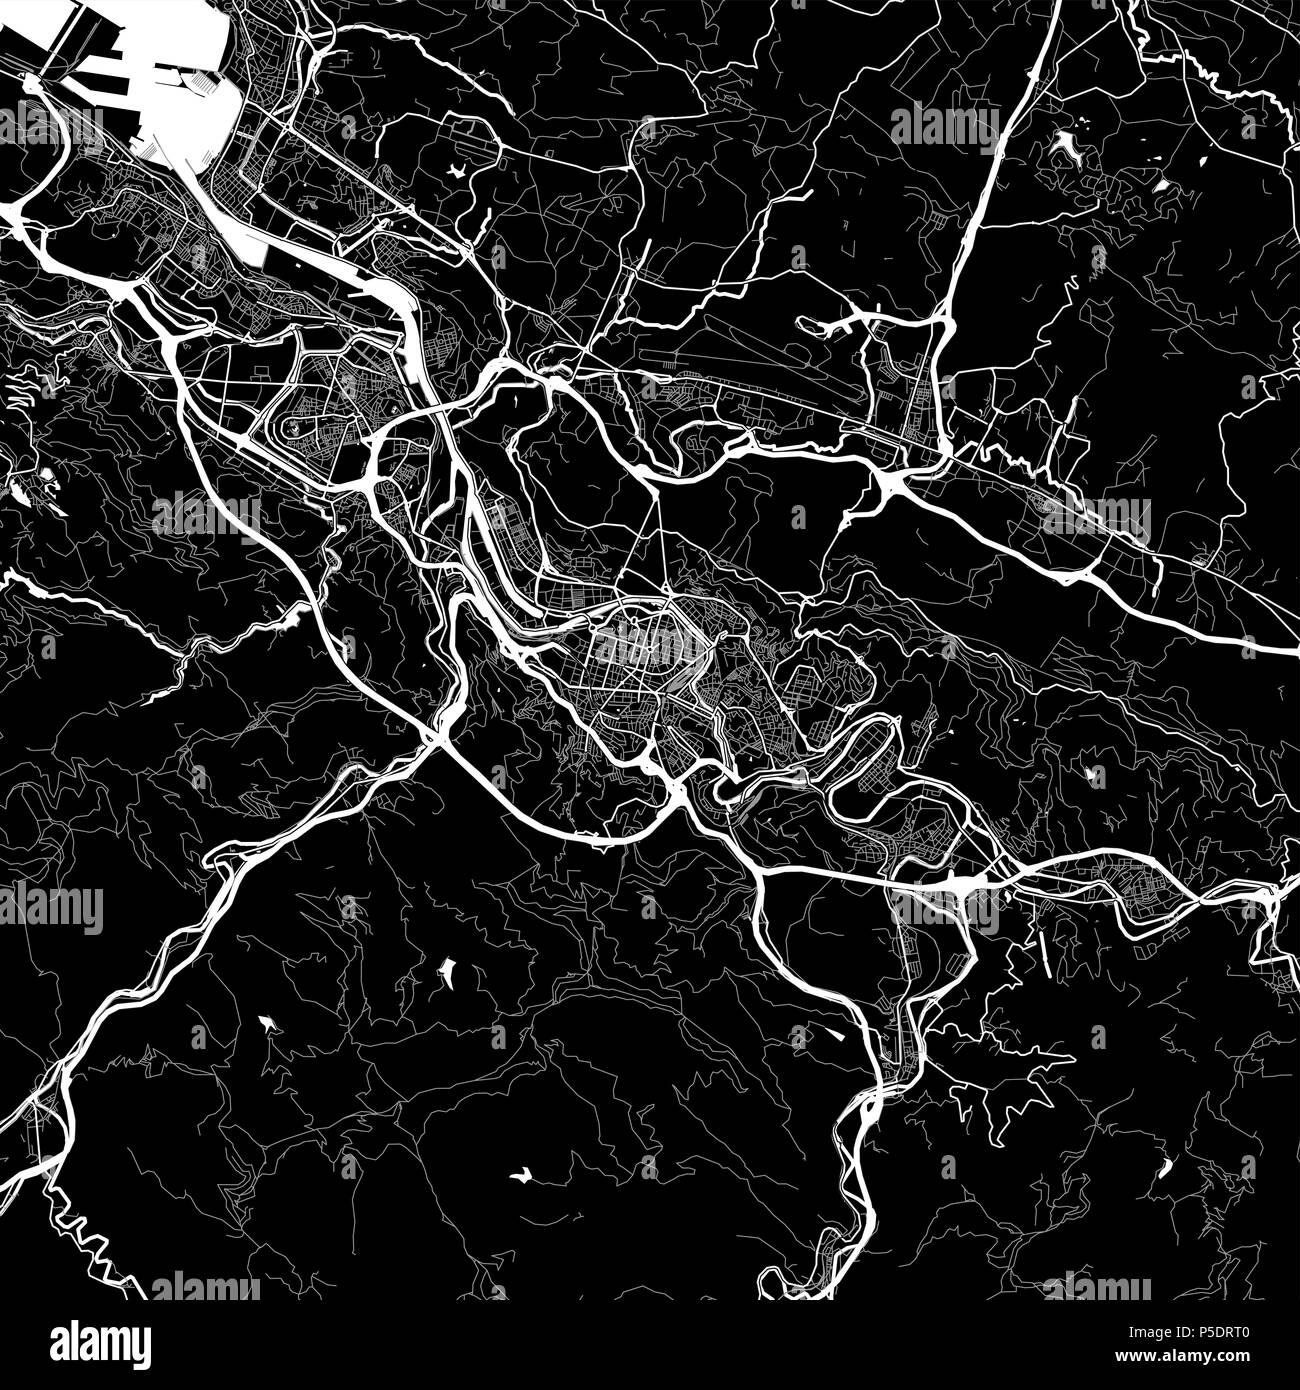 Area map of Bilbao, Spain. Dark background version for infographic and marketing projects. This map of Bilbao contains typical landmarks with streets, Stock Photo